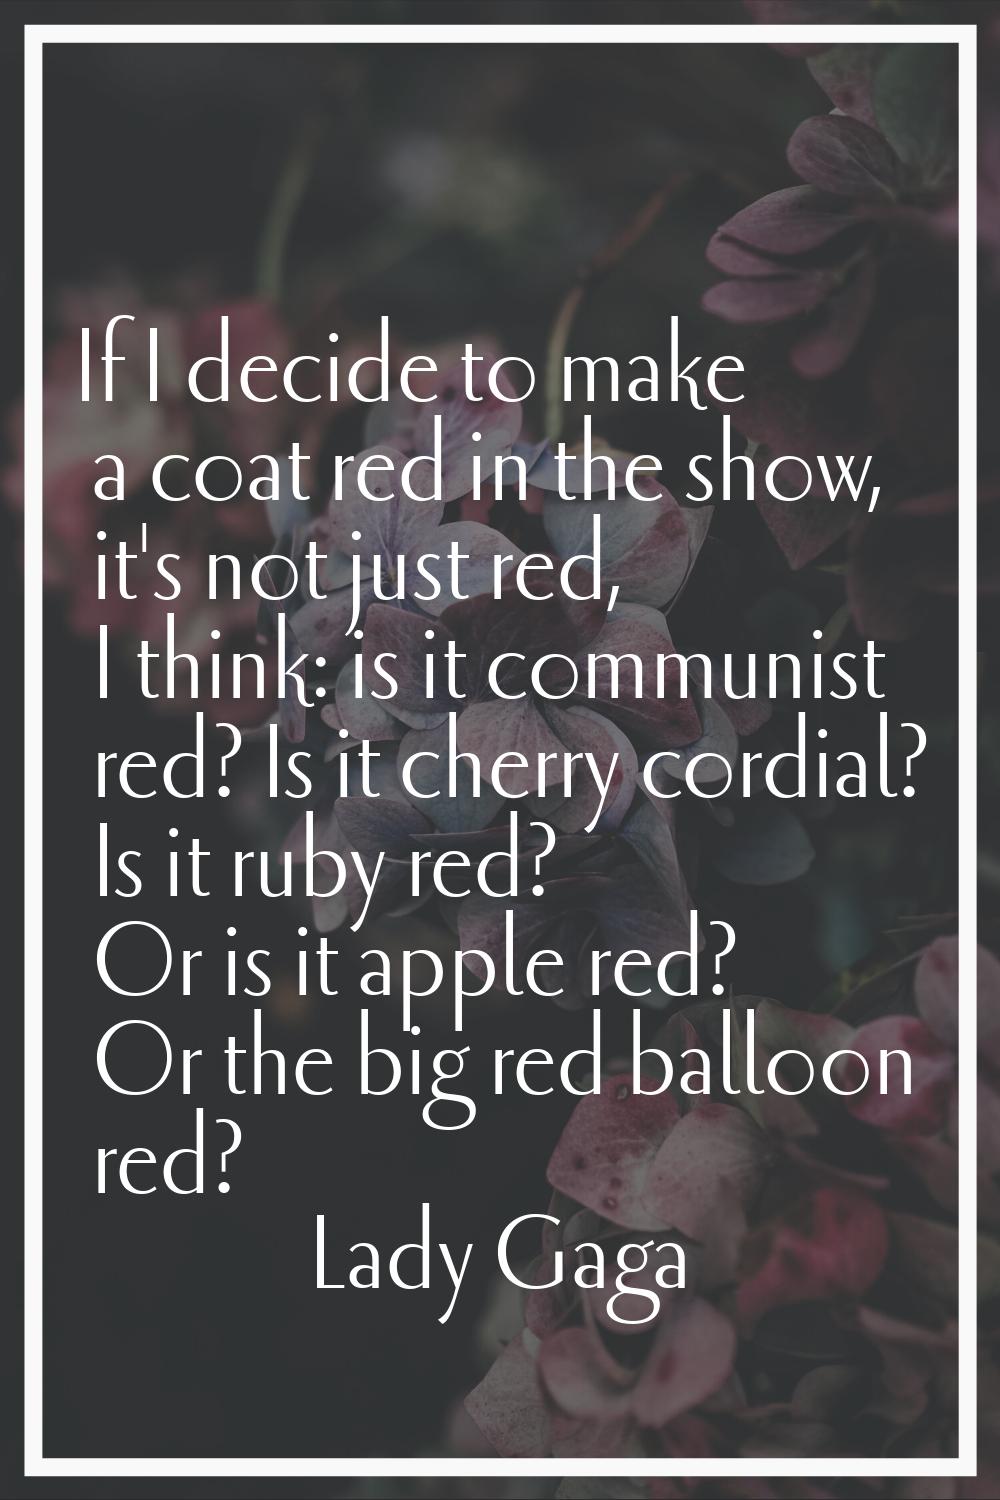 If I decide to make a coat red in the show, it's not just red, I think: is it communist red? Is it 